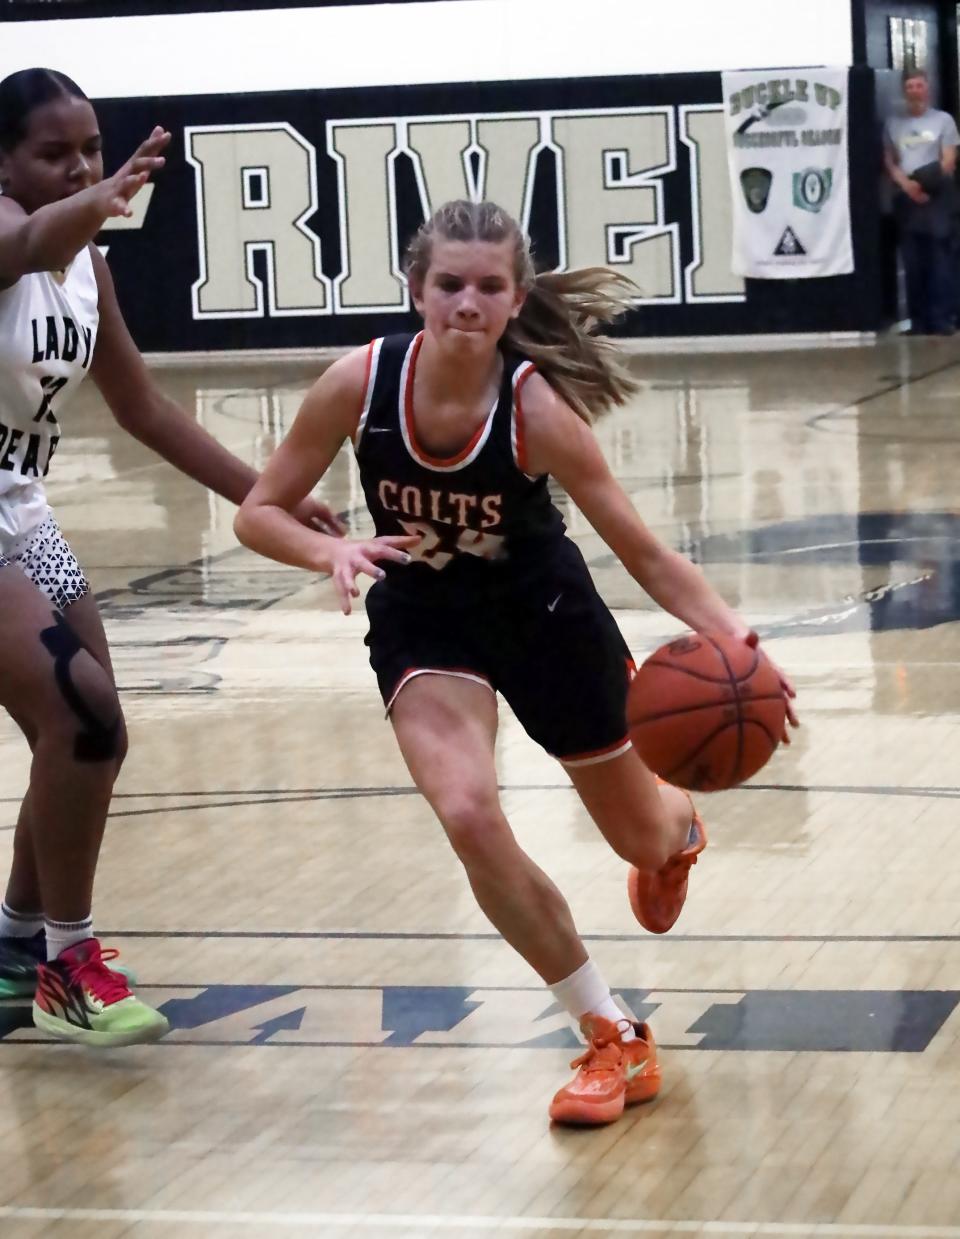 Meadowbrook's Marabelle Thornberry (24) drives the lane during the girls' basketball game Wednesday at River View High School.